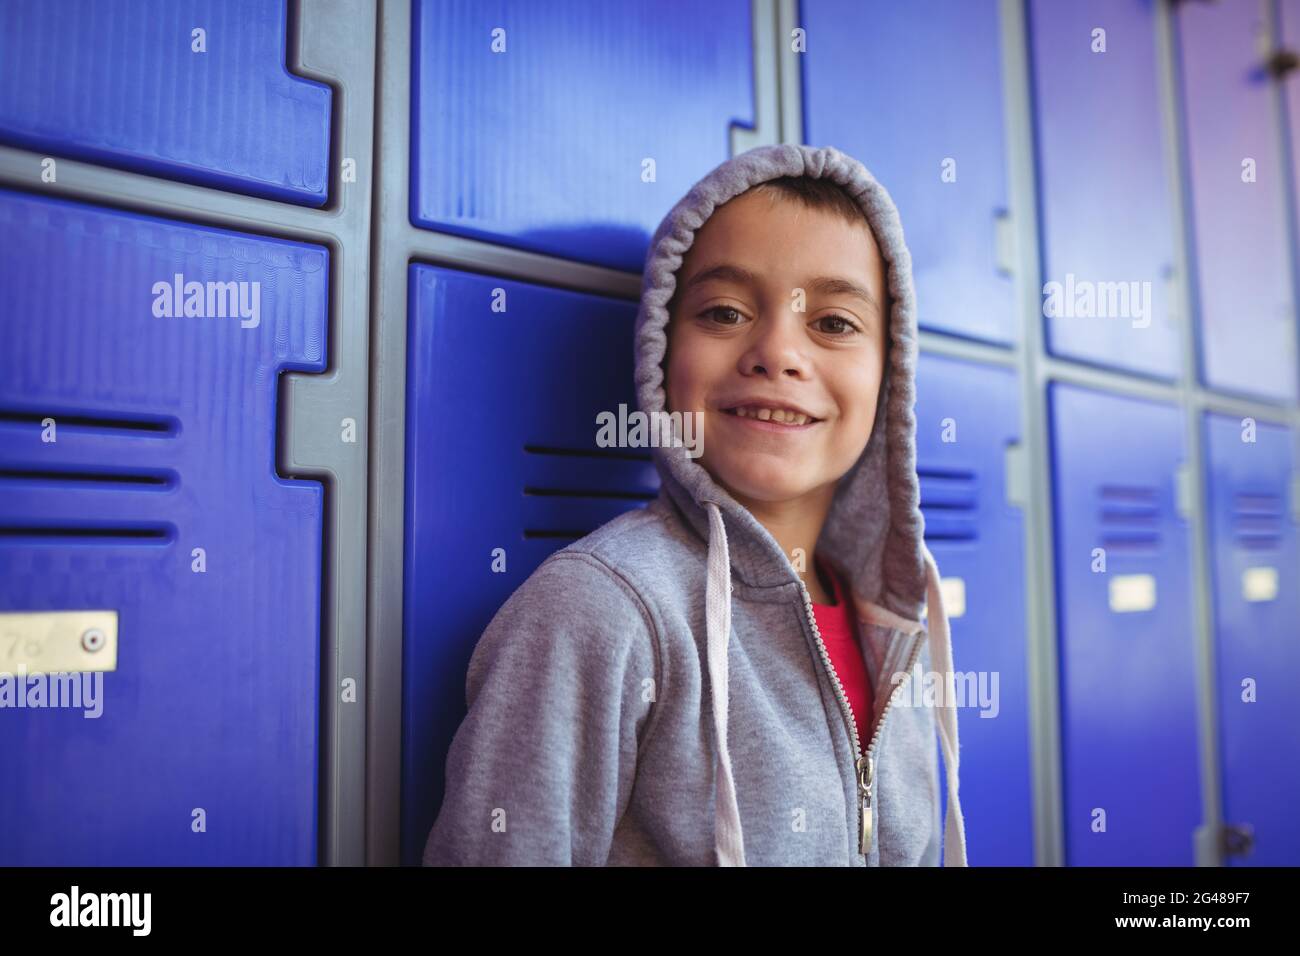 Portrait of smiling boy standing by lockers Stock Photo